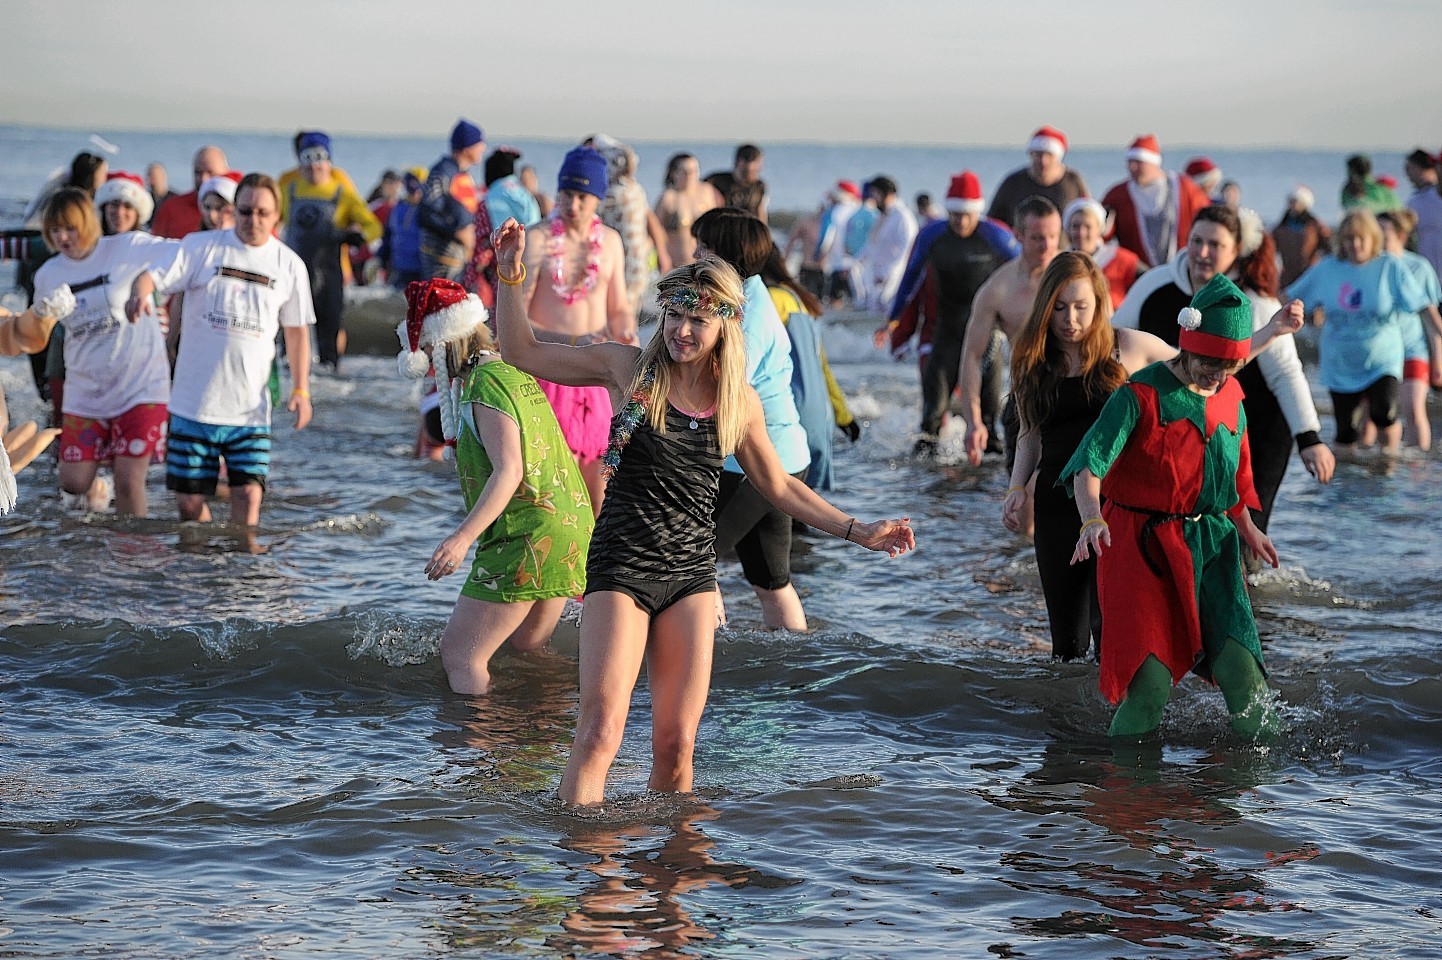 Aberdeen Lions Club, "Nippy Dipper" Boxing Day charity dip in the North Sea at Aberdeen Beach.